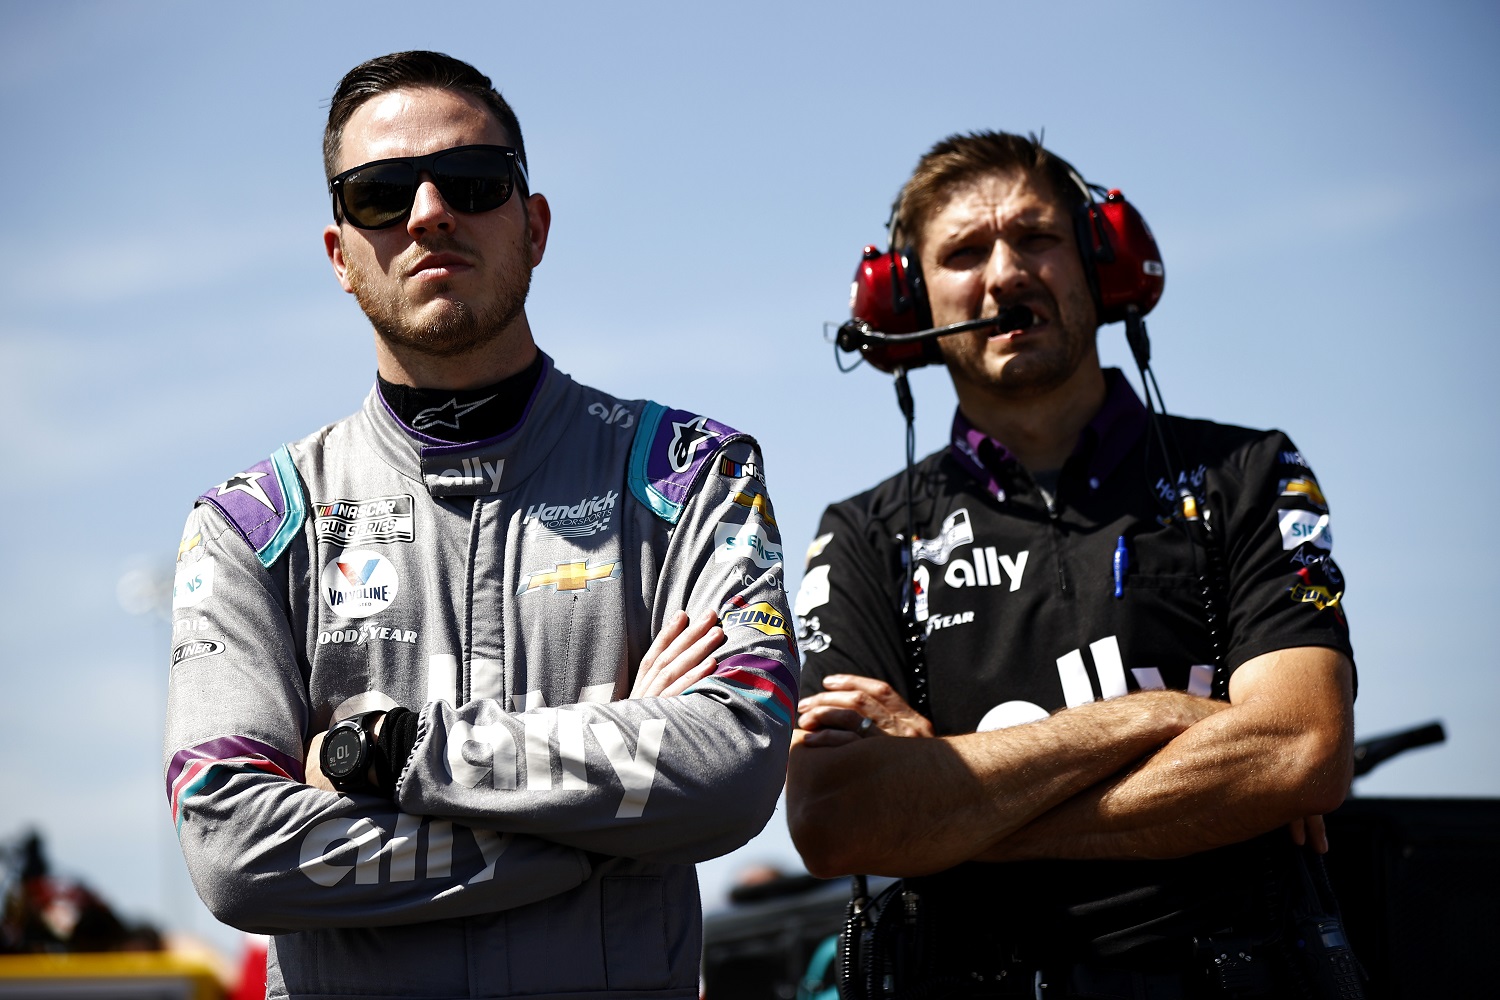 Alex Bowman, driver of the No. 48 Chevrolet, and crew chief Greg Ives look on during qualifying for the NASCAR Cup Series Ally 400 at Nashville Superspeedway on June 20, 2021.